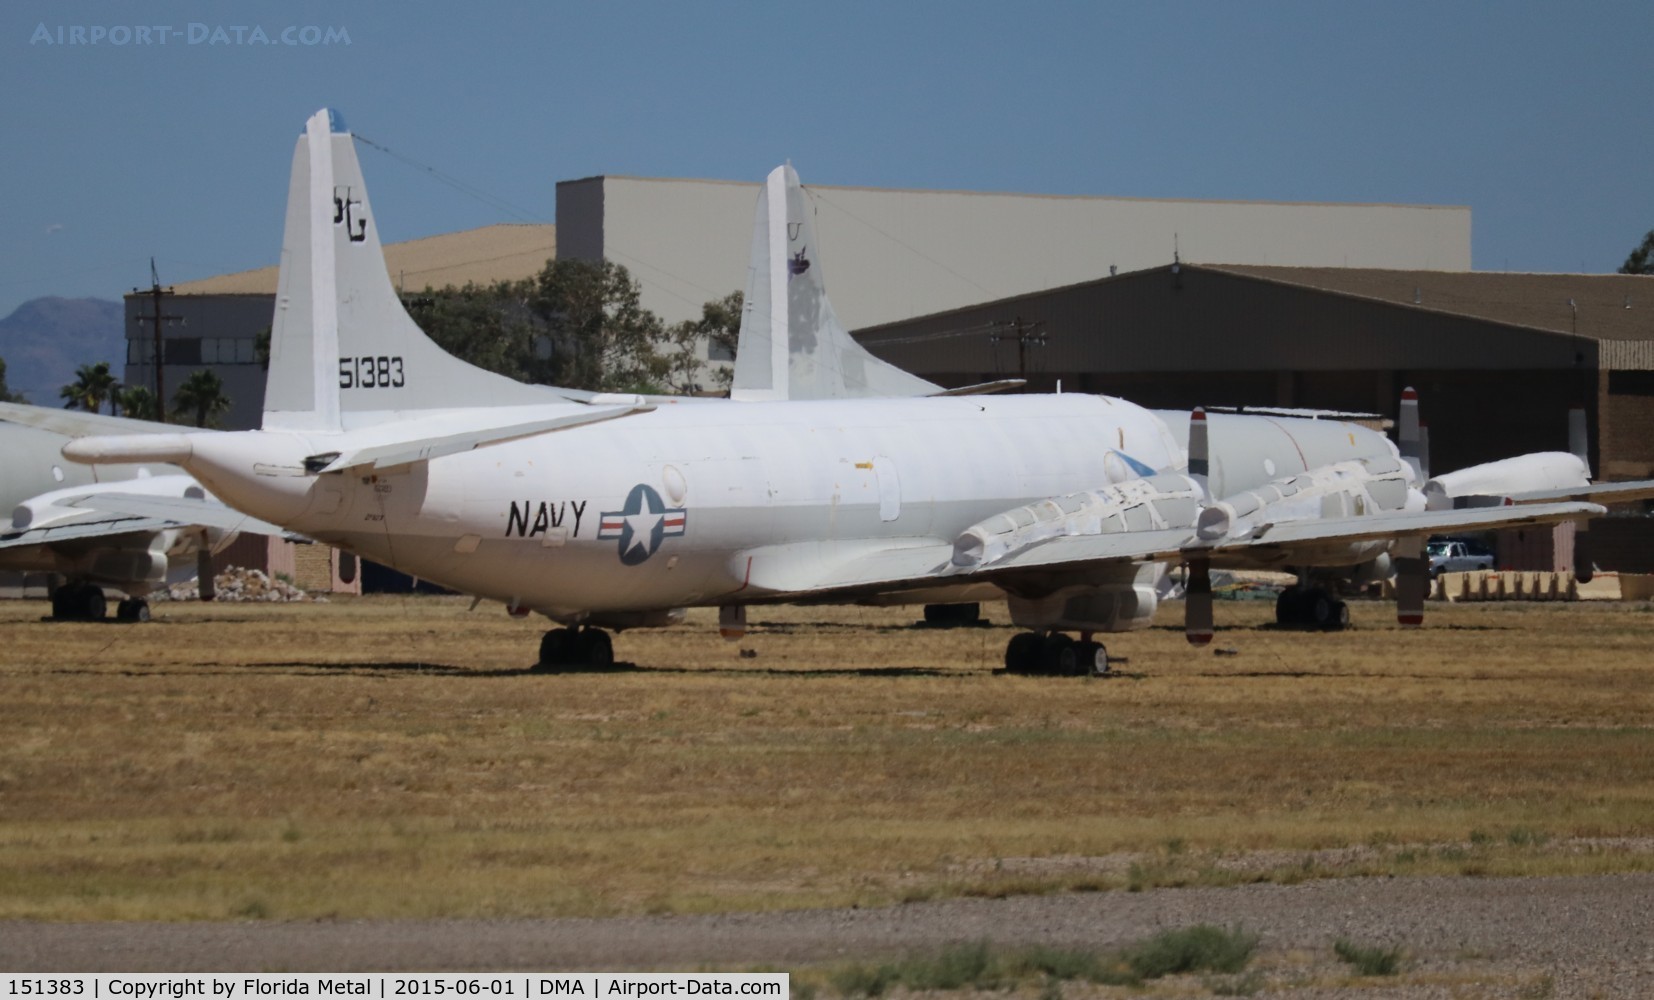 151383, Lockheed P-3A Orion C/N 185-5096, P-3A Orion